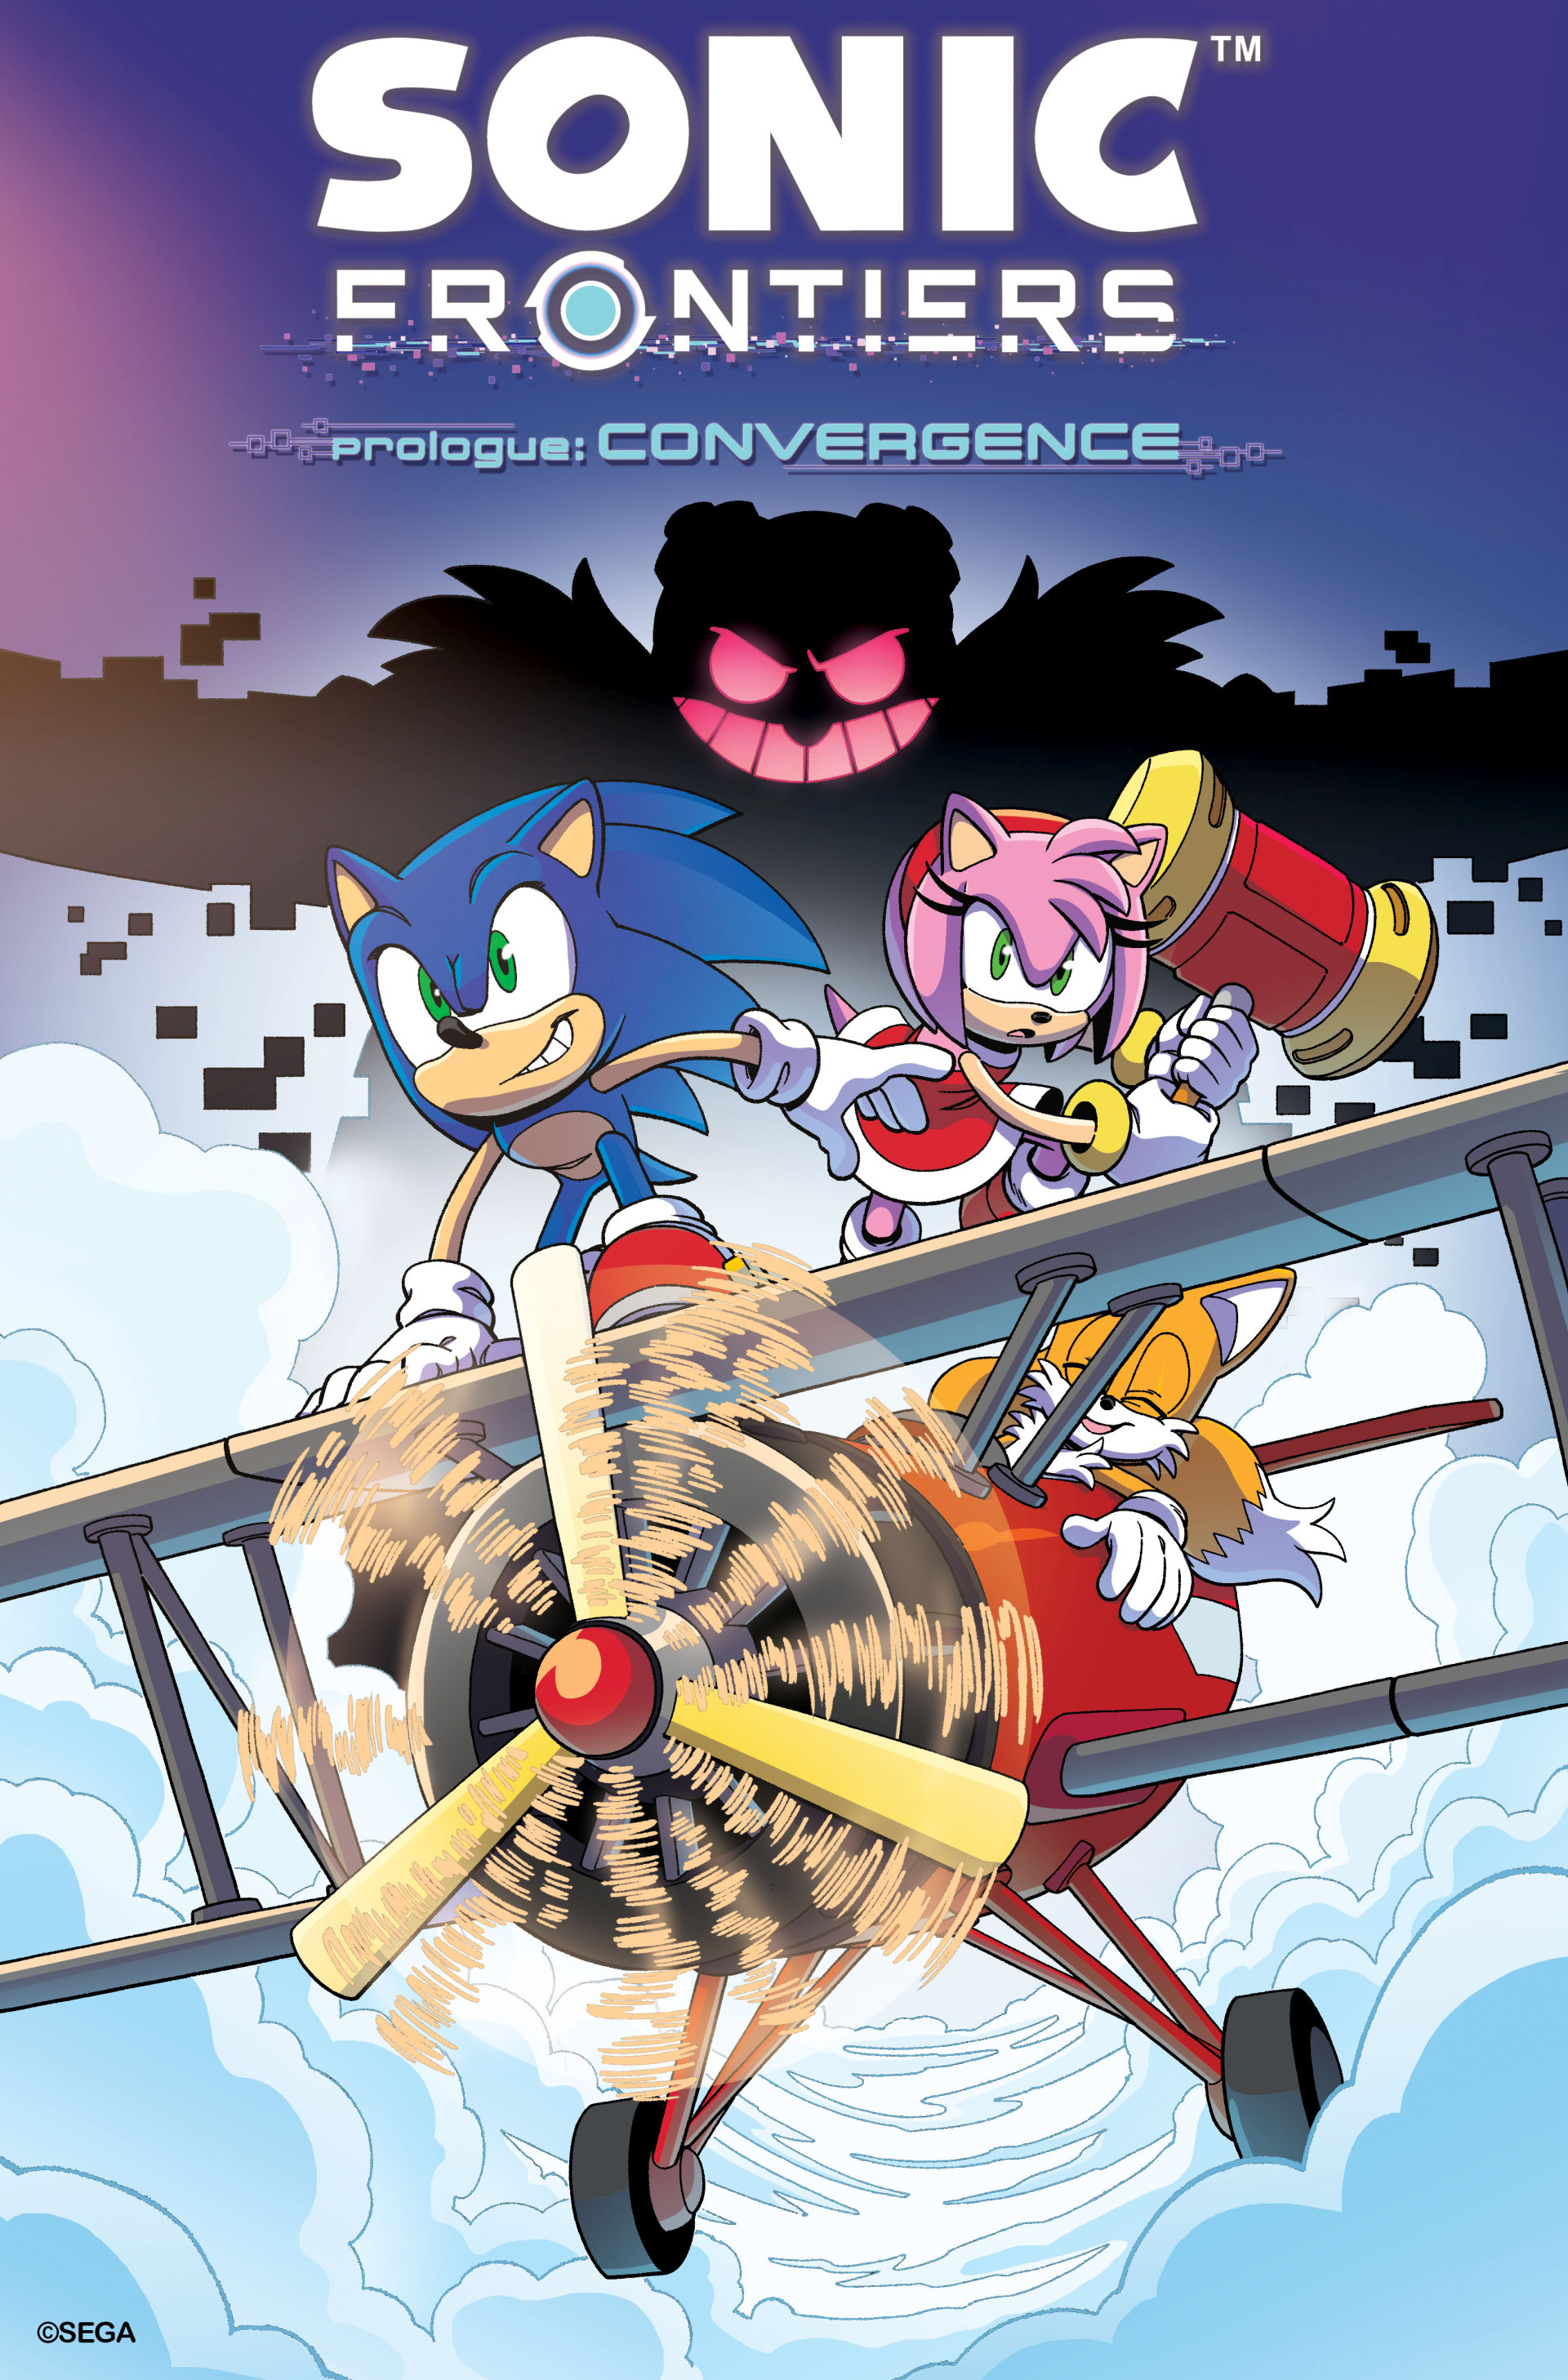 Gamer Cafe 1411 - Sonic Speed (Sonic Frontiers) : r/comics